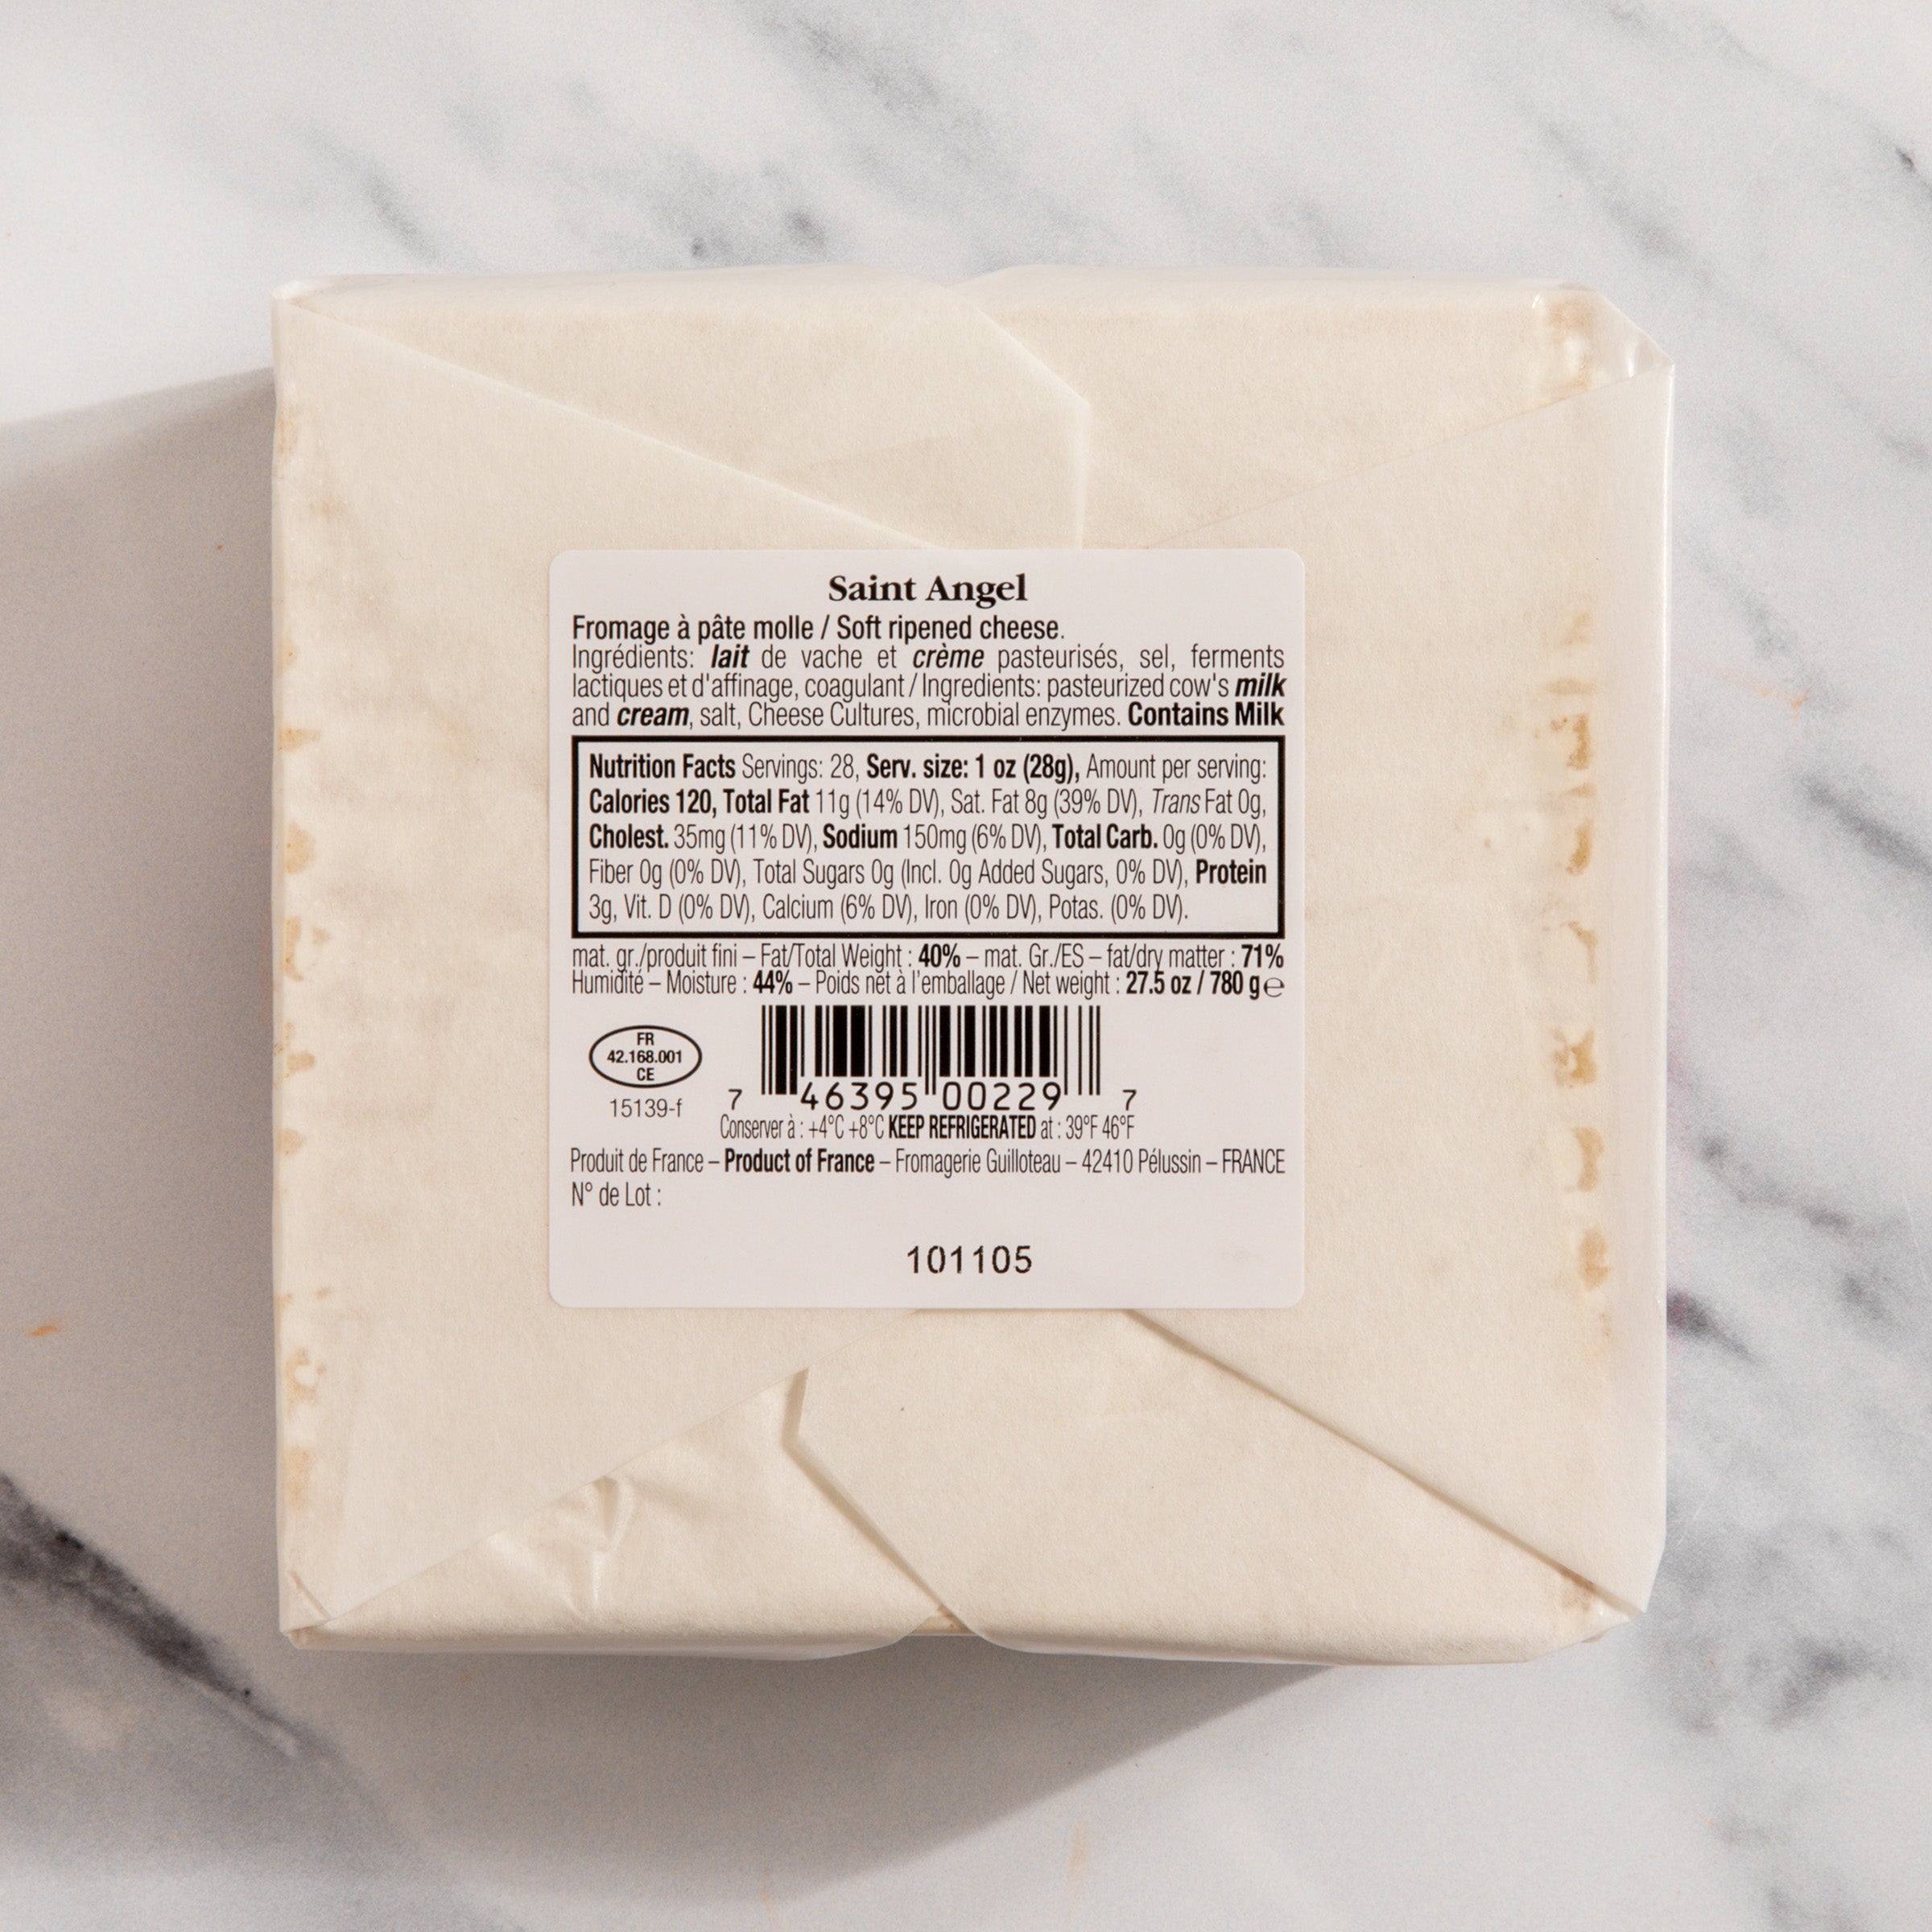 Guilloteau/Cheese Saint igourmet Triple Angel – Cheese/Fromagerie Creme